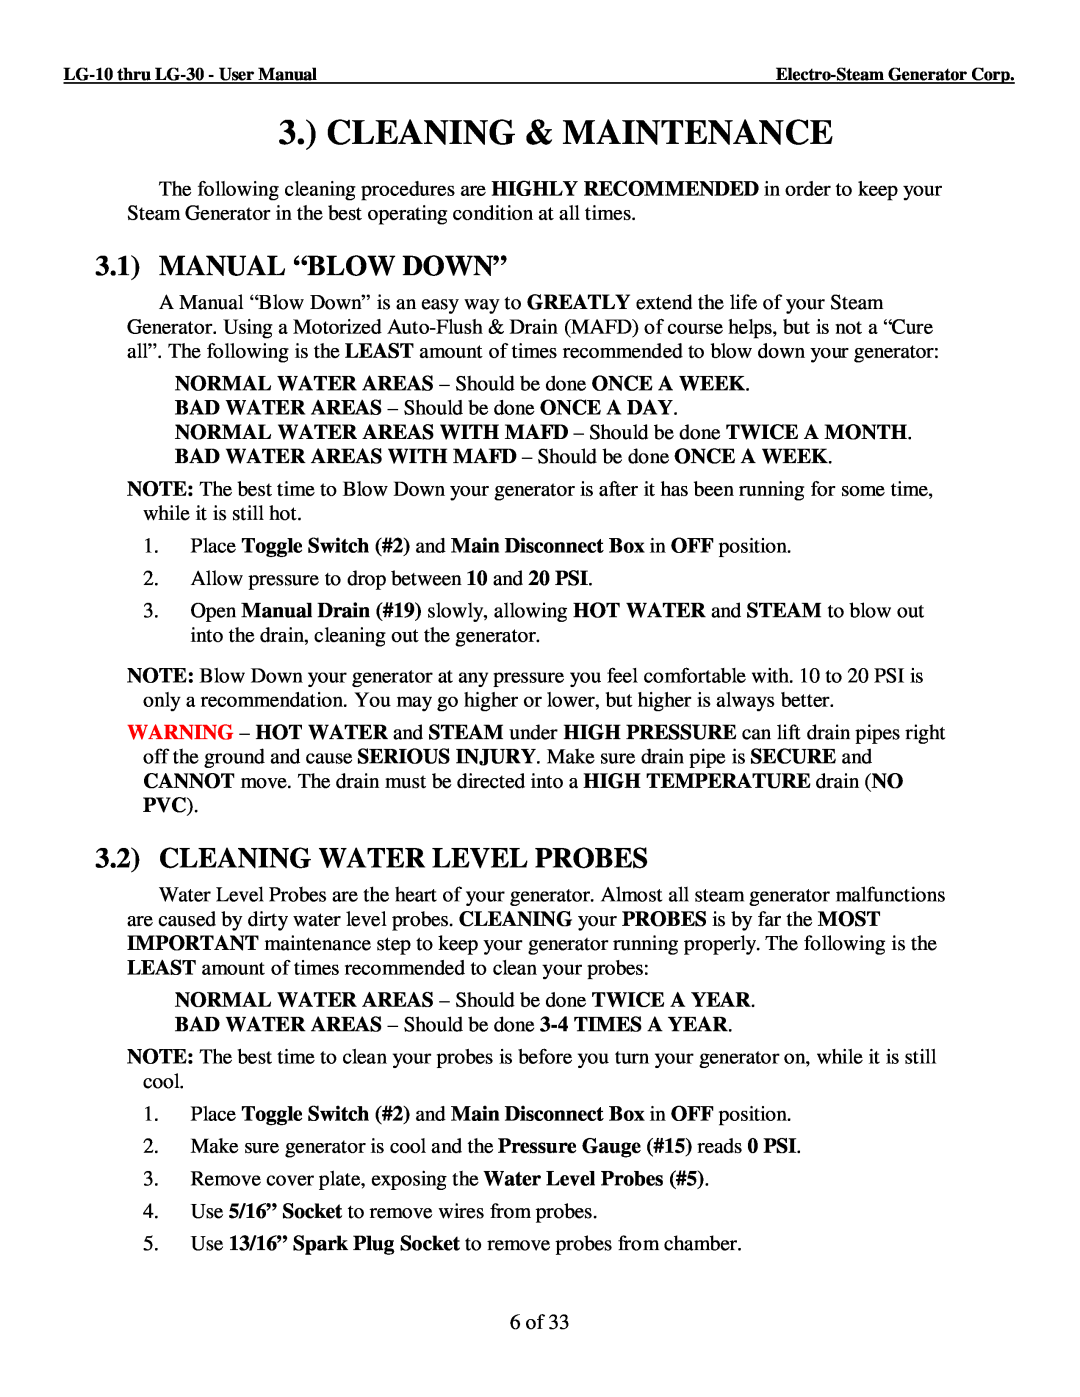 LG Electronics 30, 10 user manual Cleaning & Maintenance, Manual “Blow Down”, Cleaning Water Level Probes 